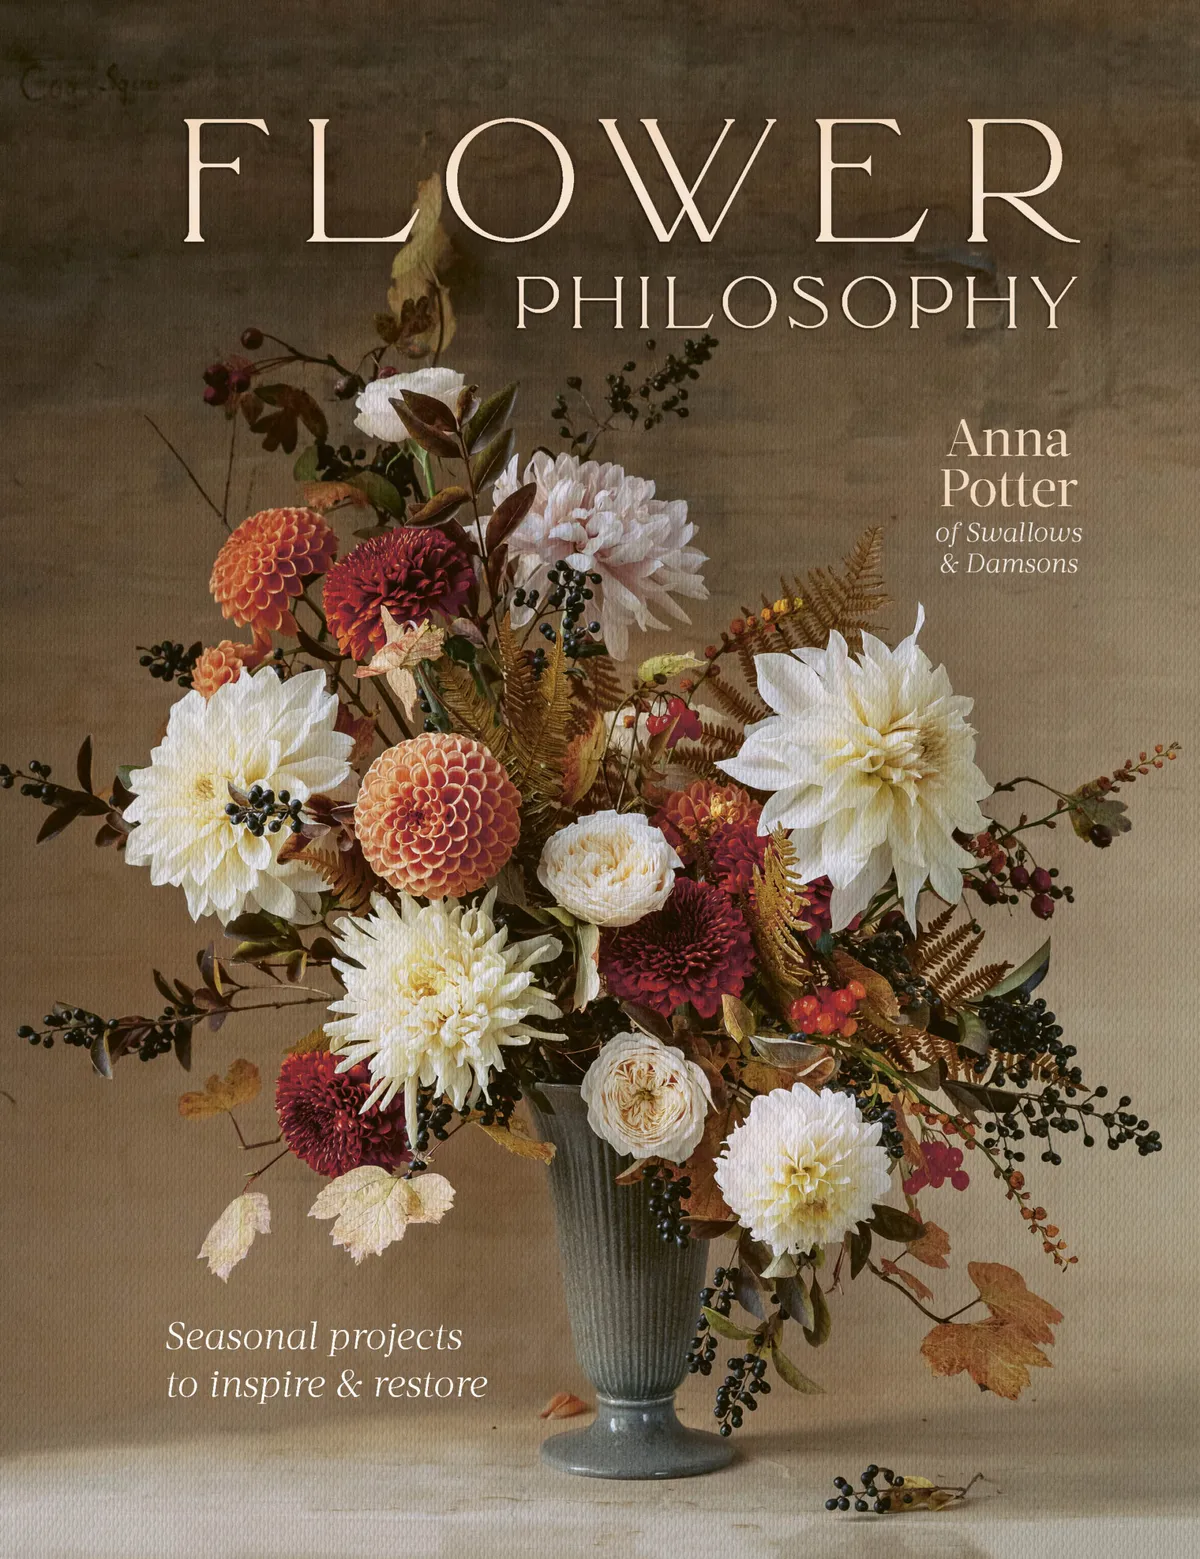 Flower Philosophy by Anna Potter